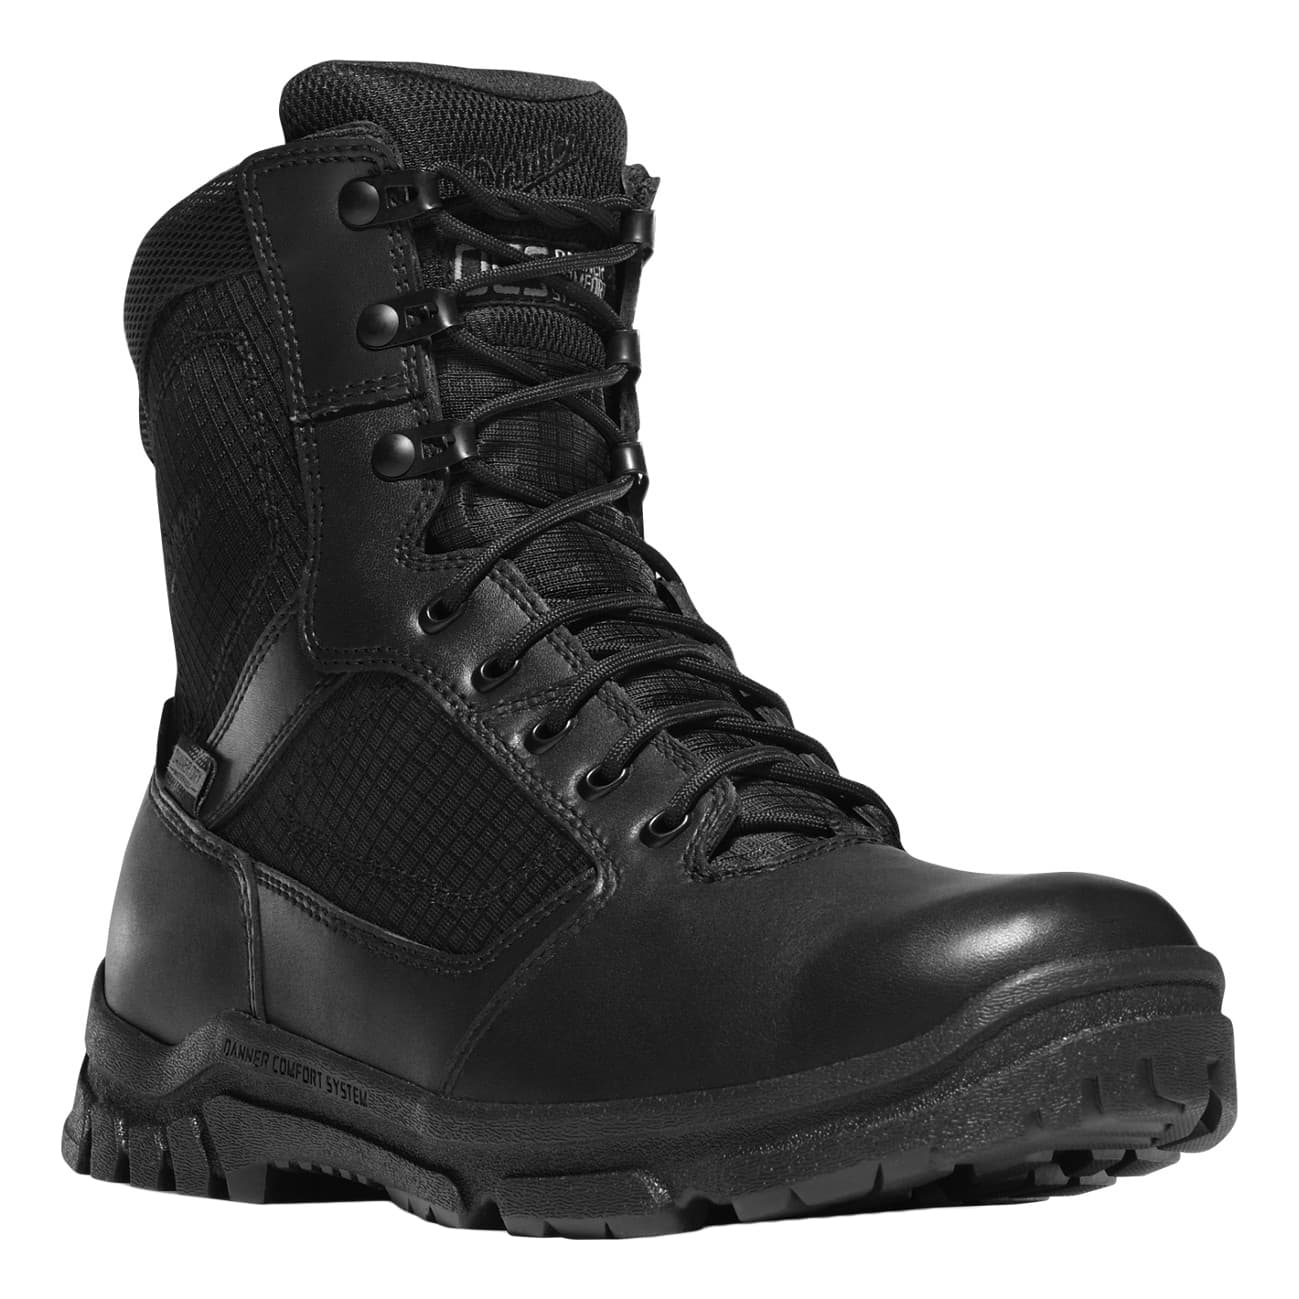 Under Armour Tactical Boots Just $32.48 Shipped (Regularly $80)